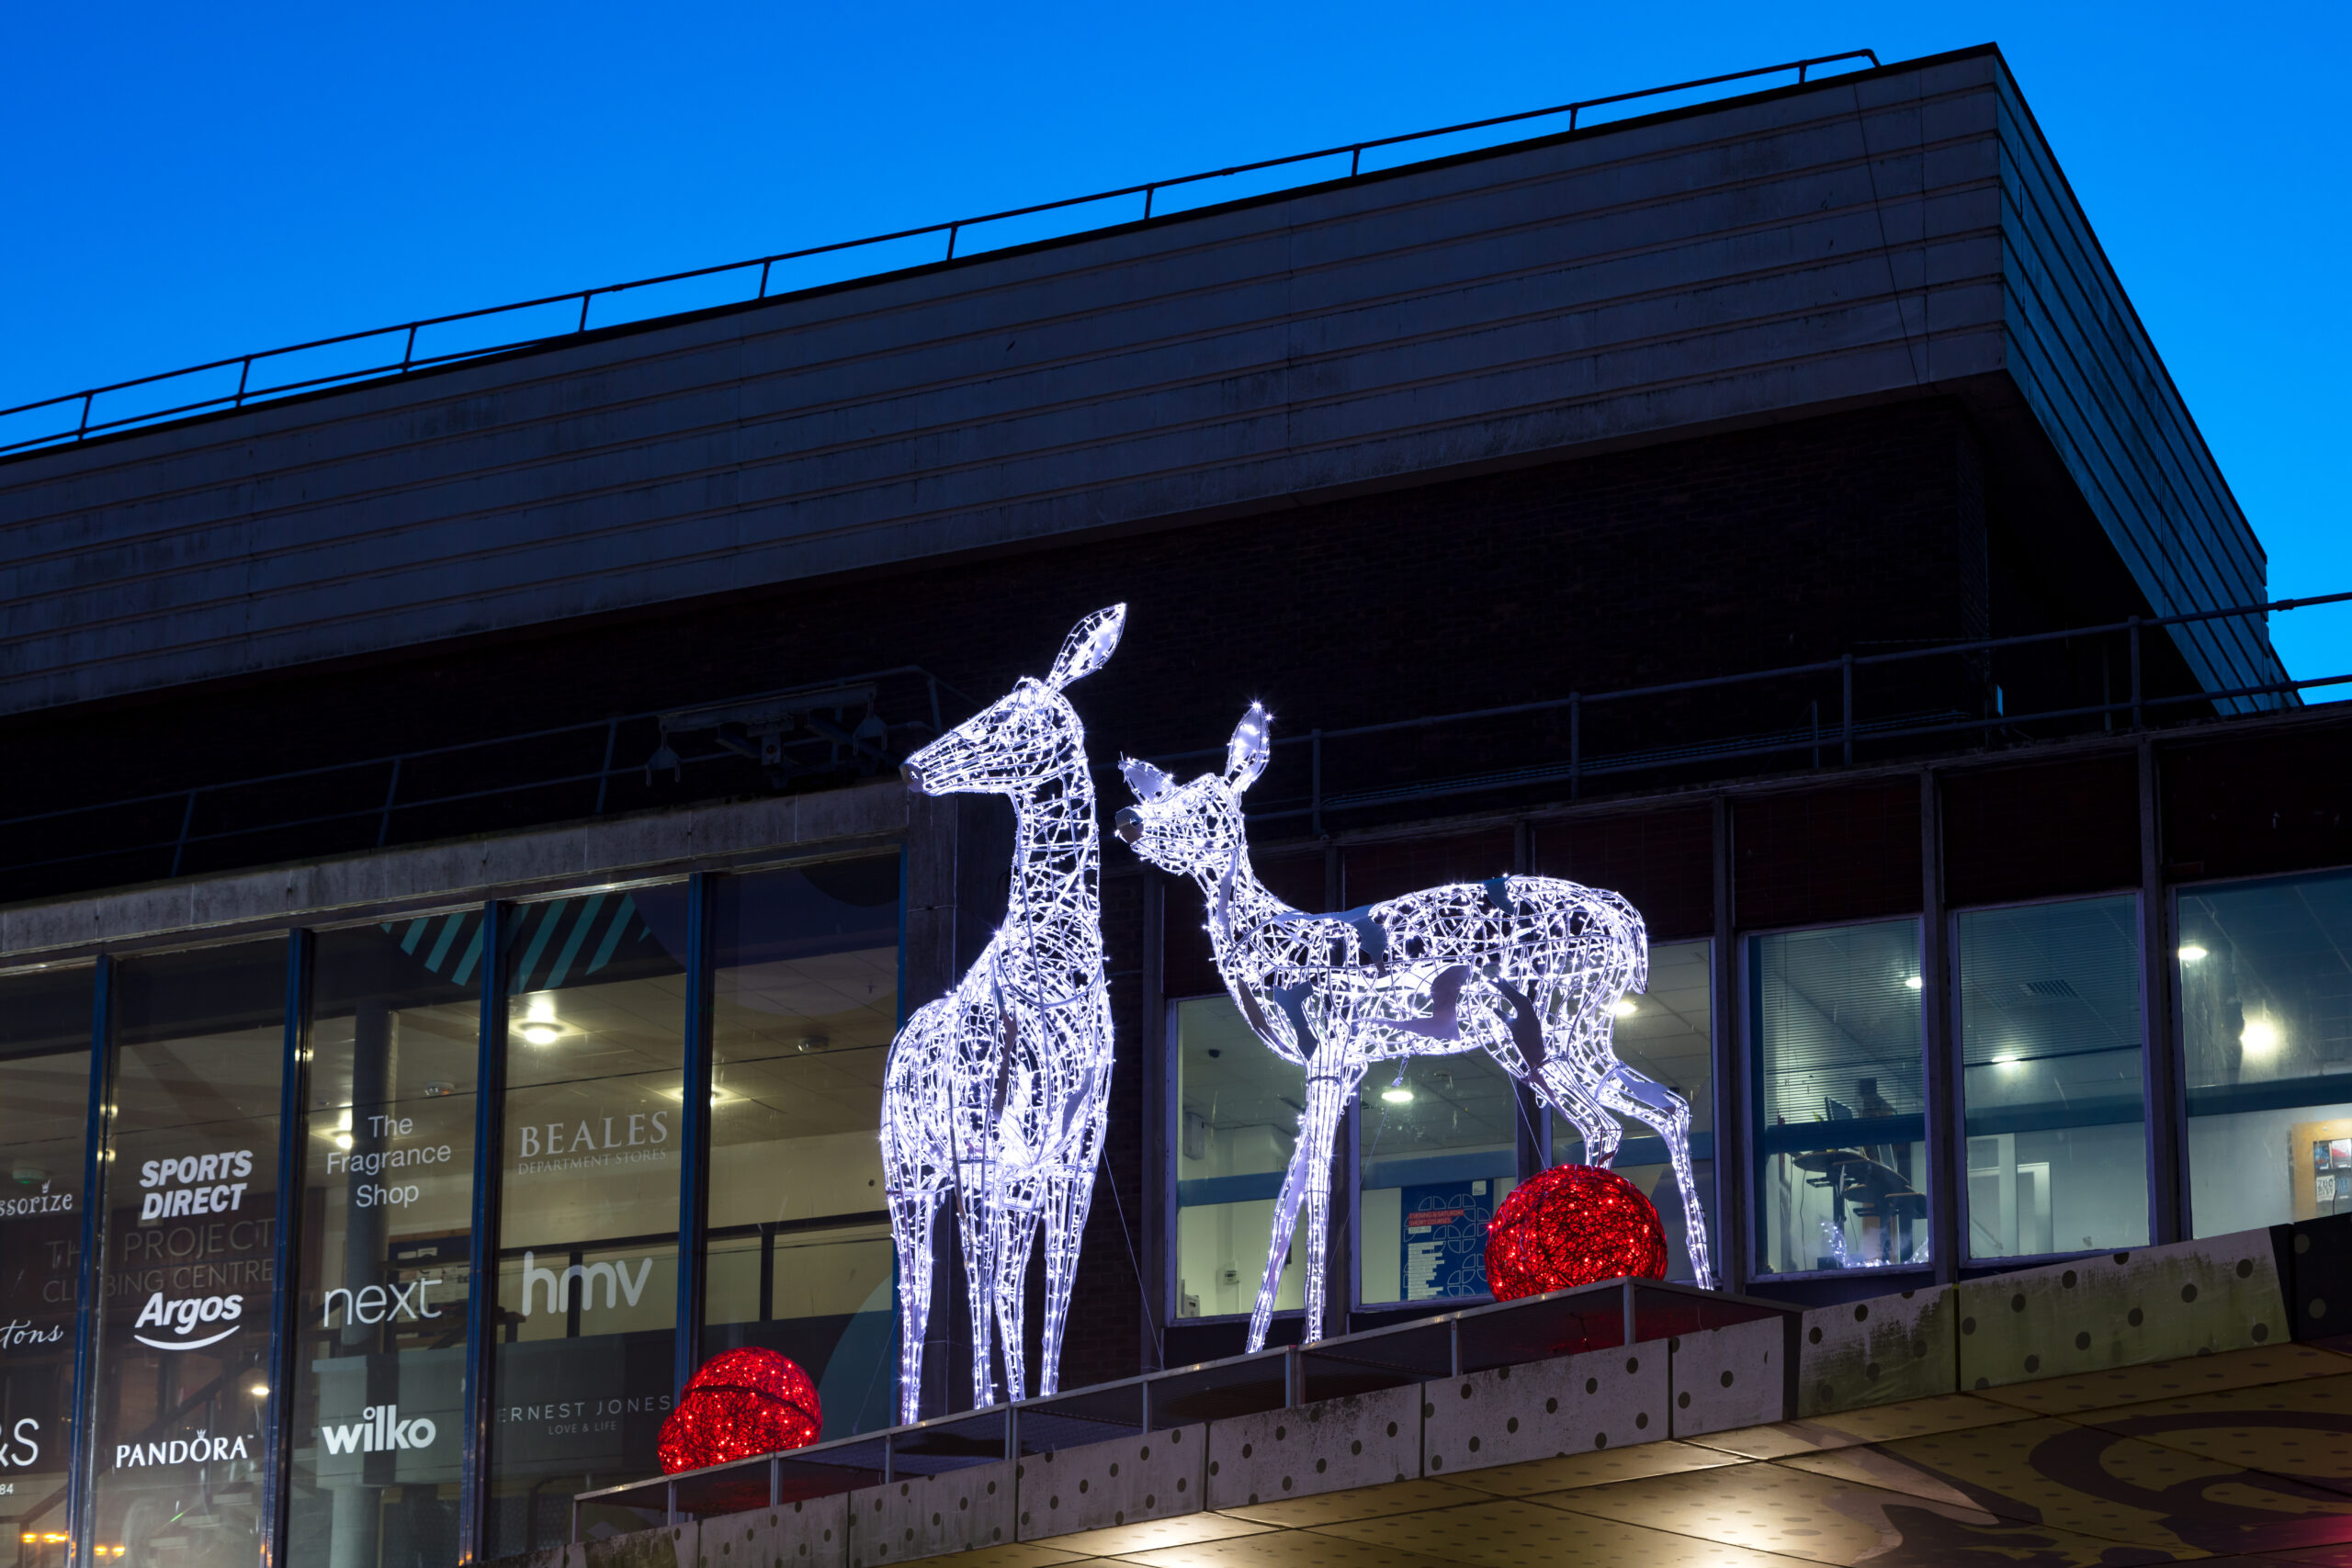 outside christmas decorations and deer light sculptures at the dolphin centre